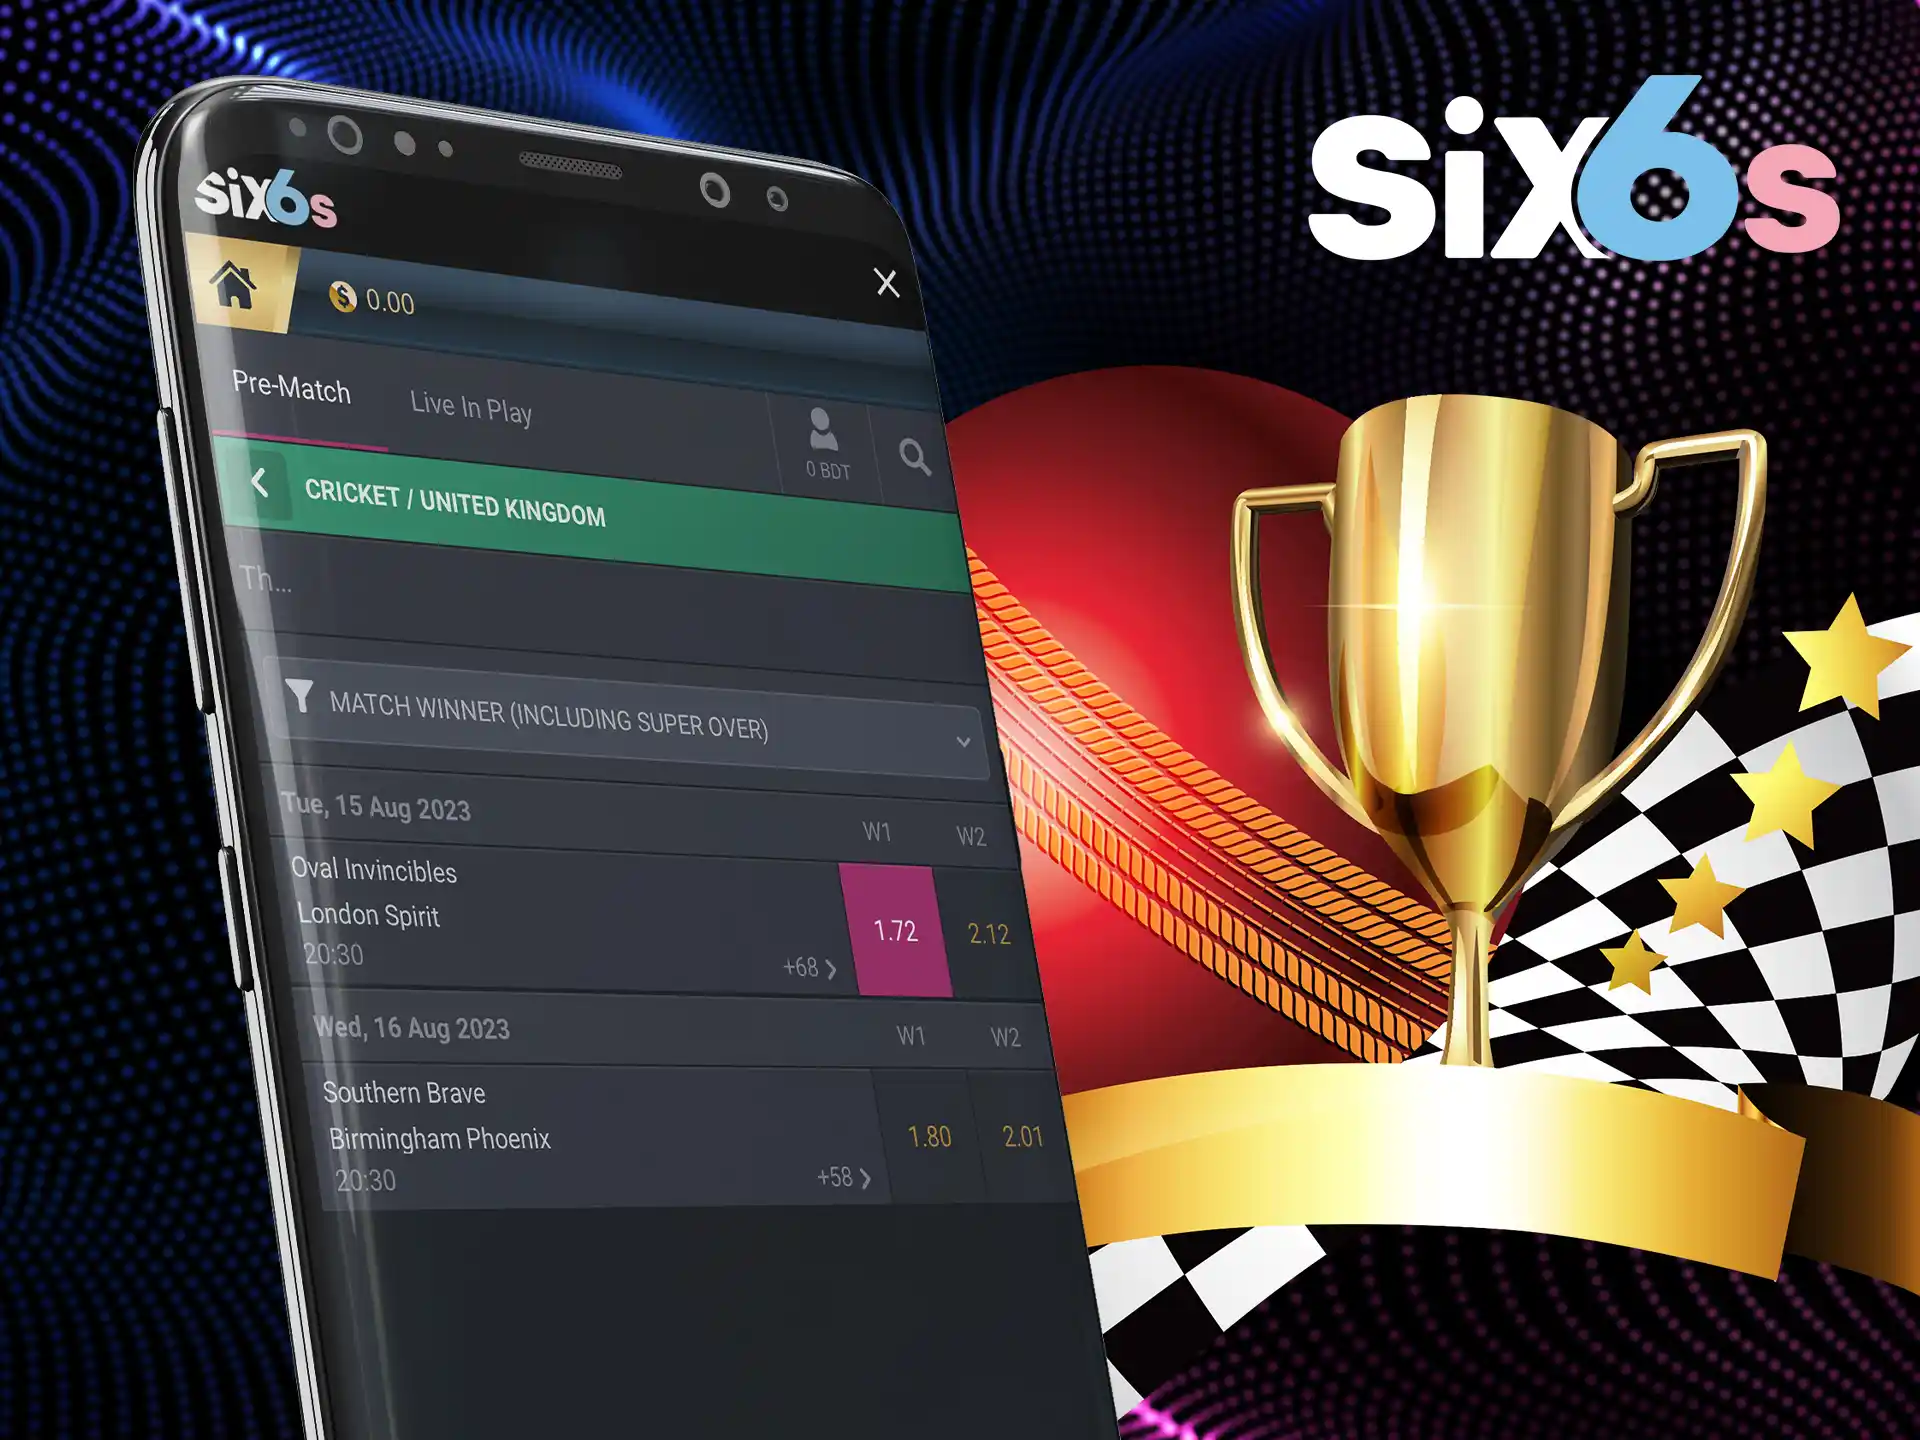 Choose the winner of the match and bet on him on the Six6s app.